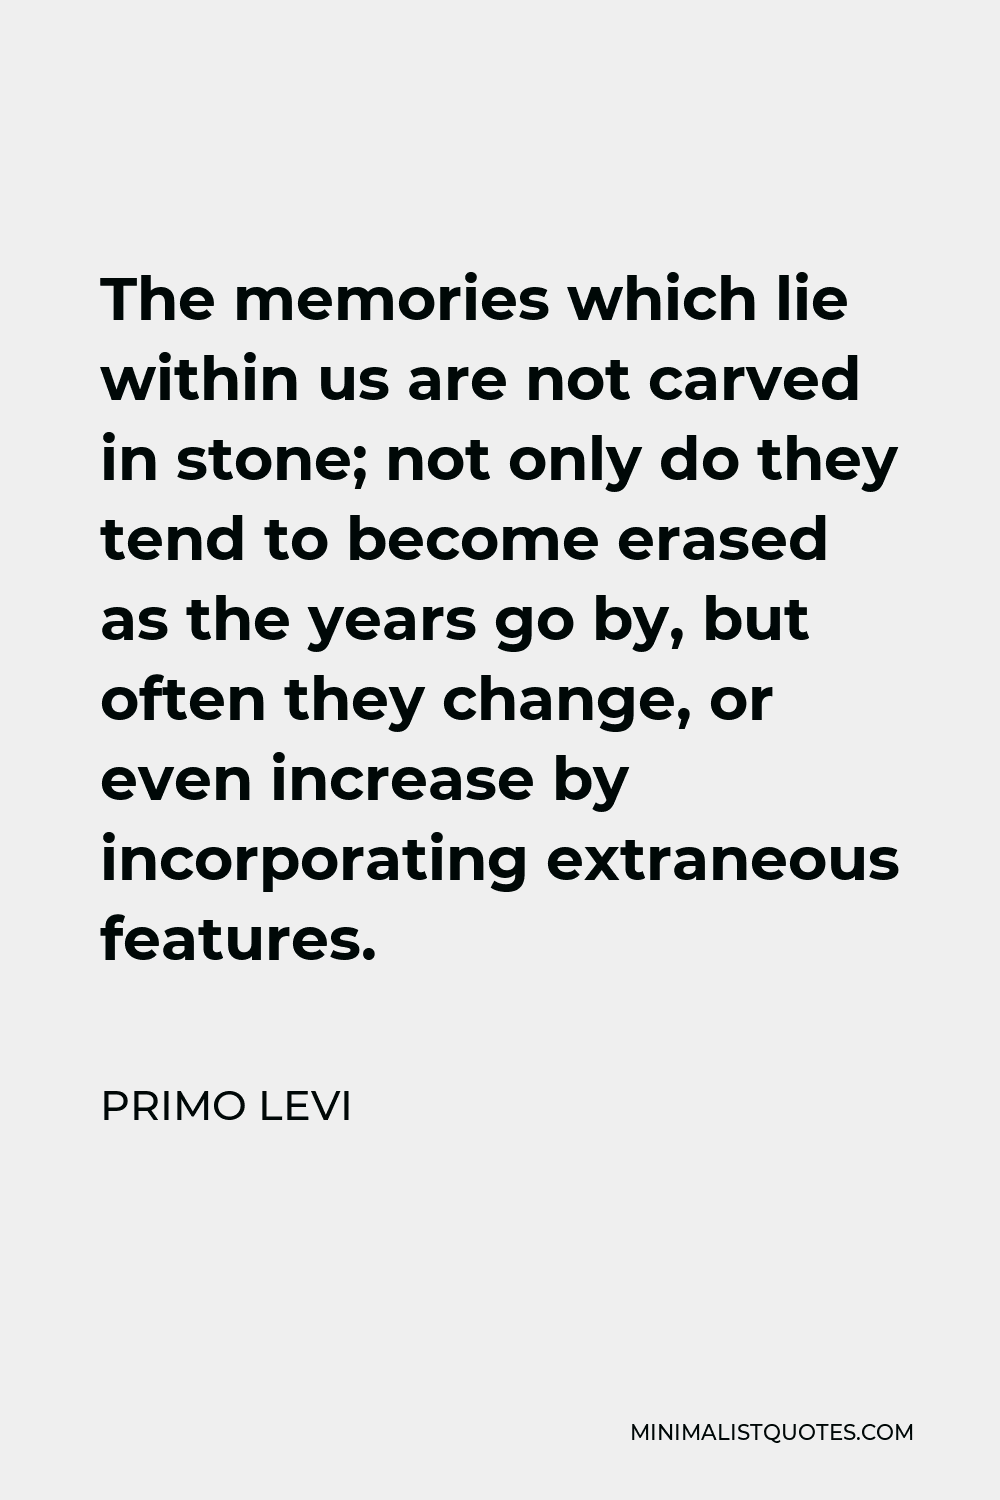 Primo Levi Quote - The memories which lie within us are not carved in stone; not only do they tend to become erased as the years go by, but often they change, or even increase by incorporating extraneous features.